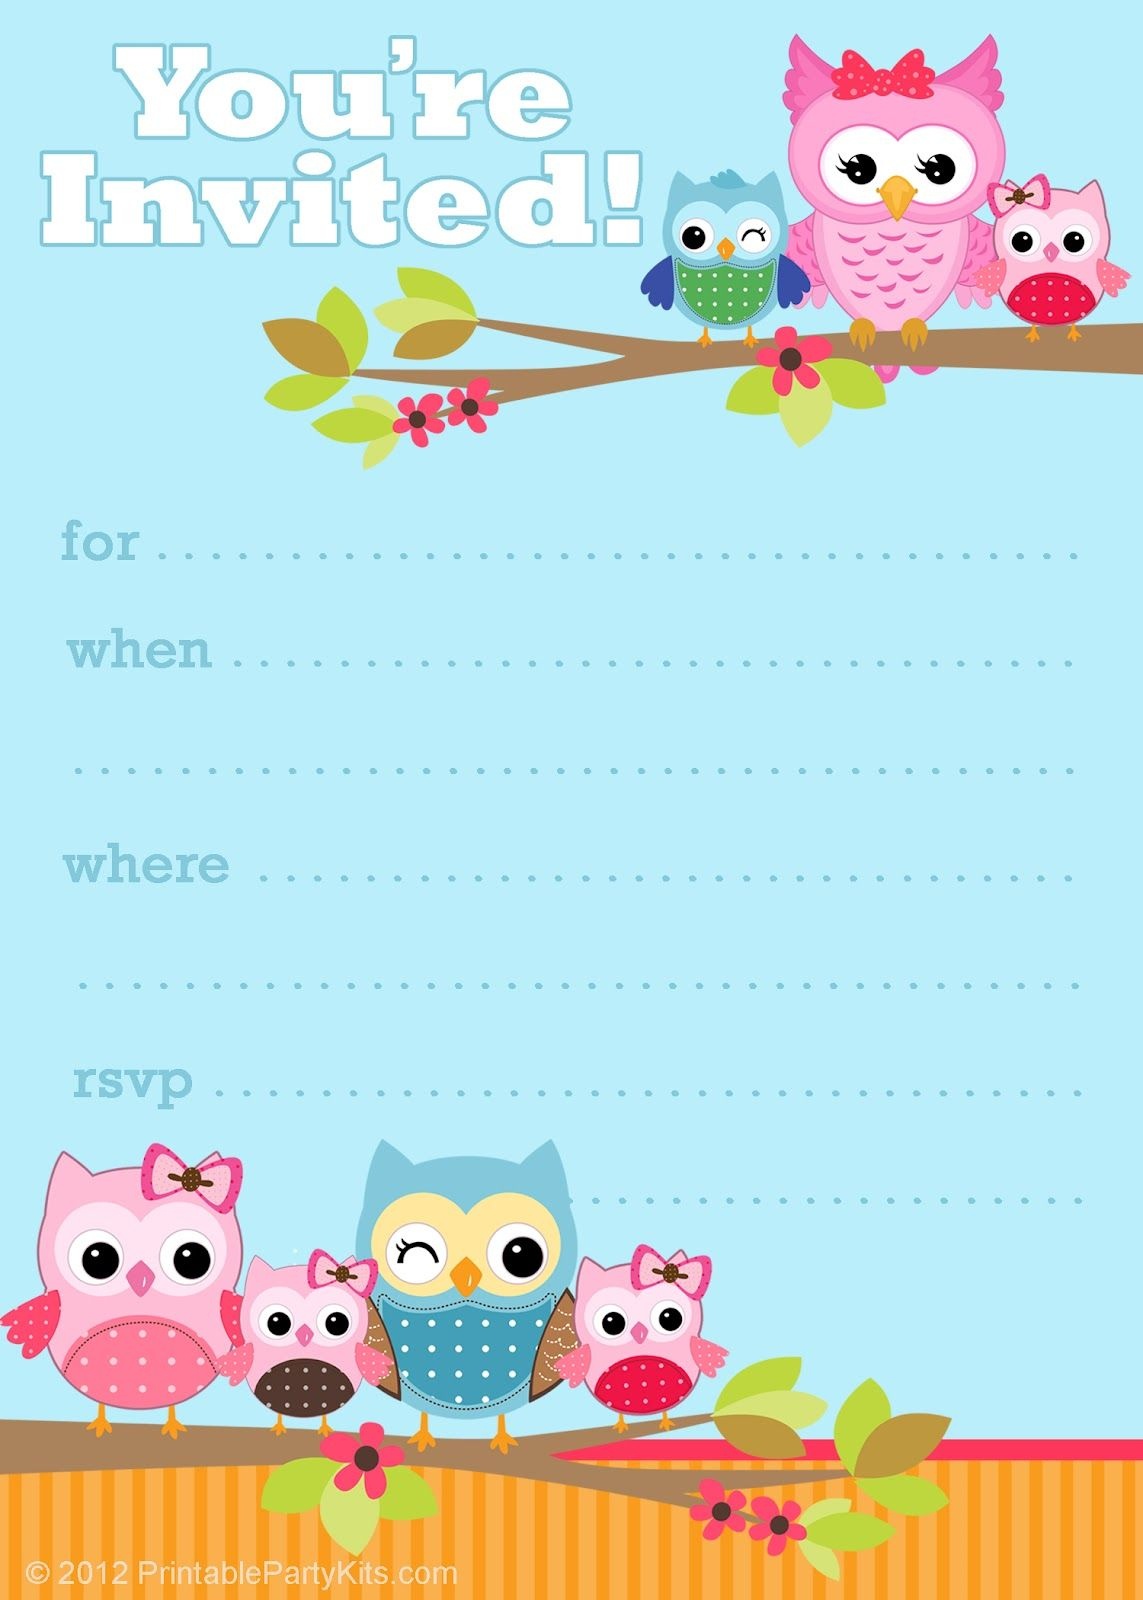 Free Printable Party Invitations: Cute Owl Invitations | Kids - Free Printable Birthday Invitations Pinterest